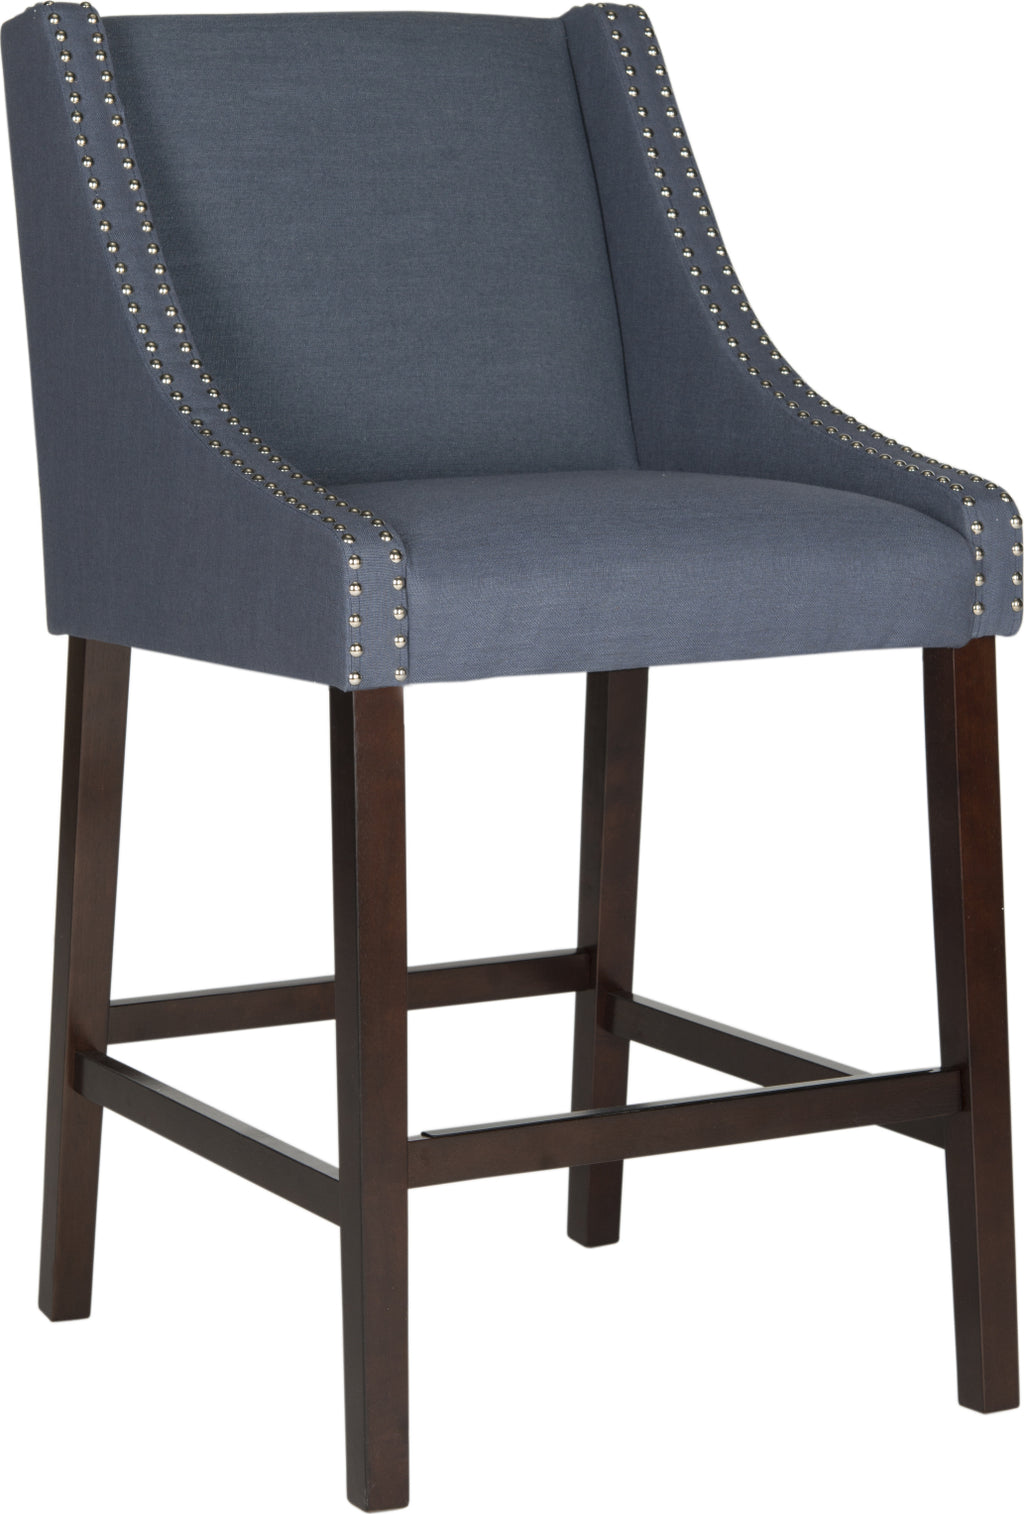 Safavieh Dylan Bar Stool Navy and Espresso Furniture  Feature